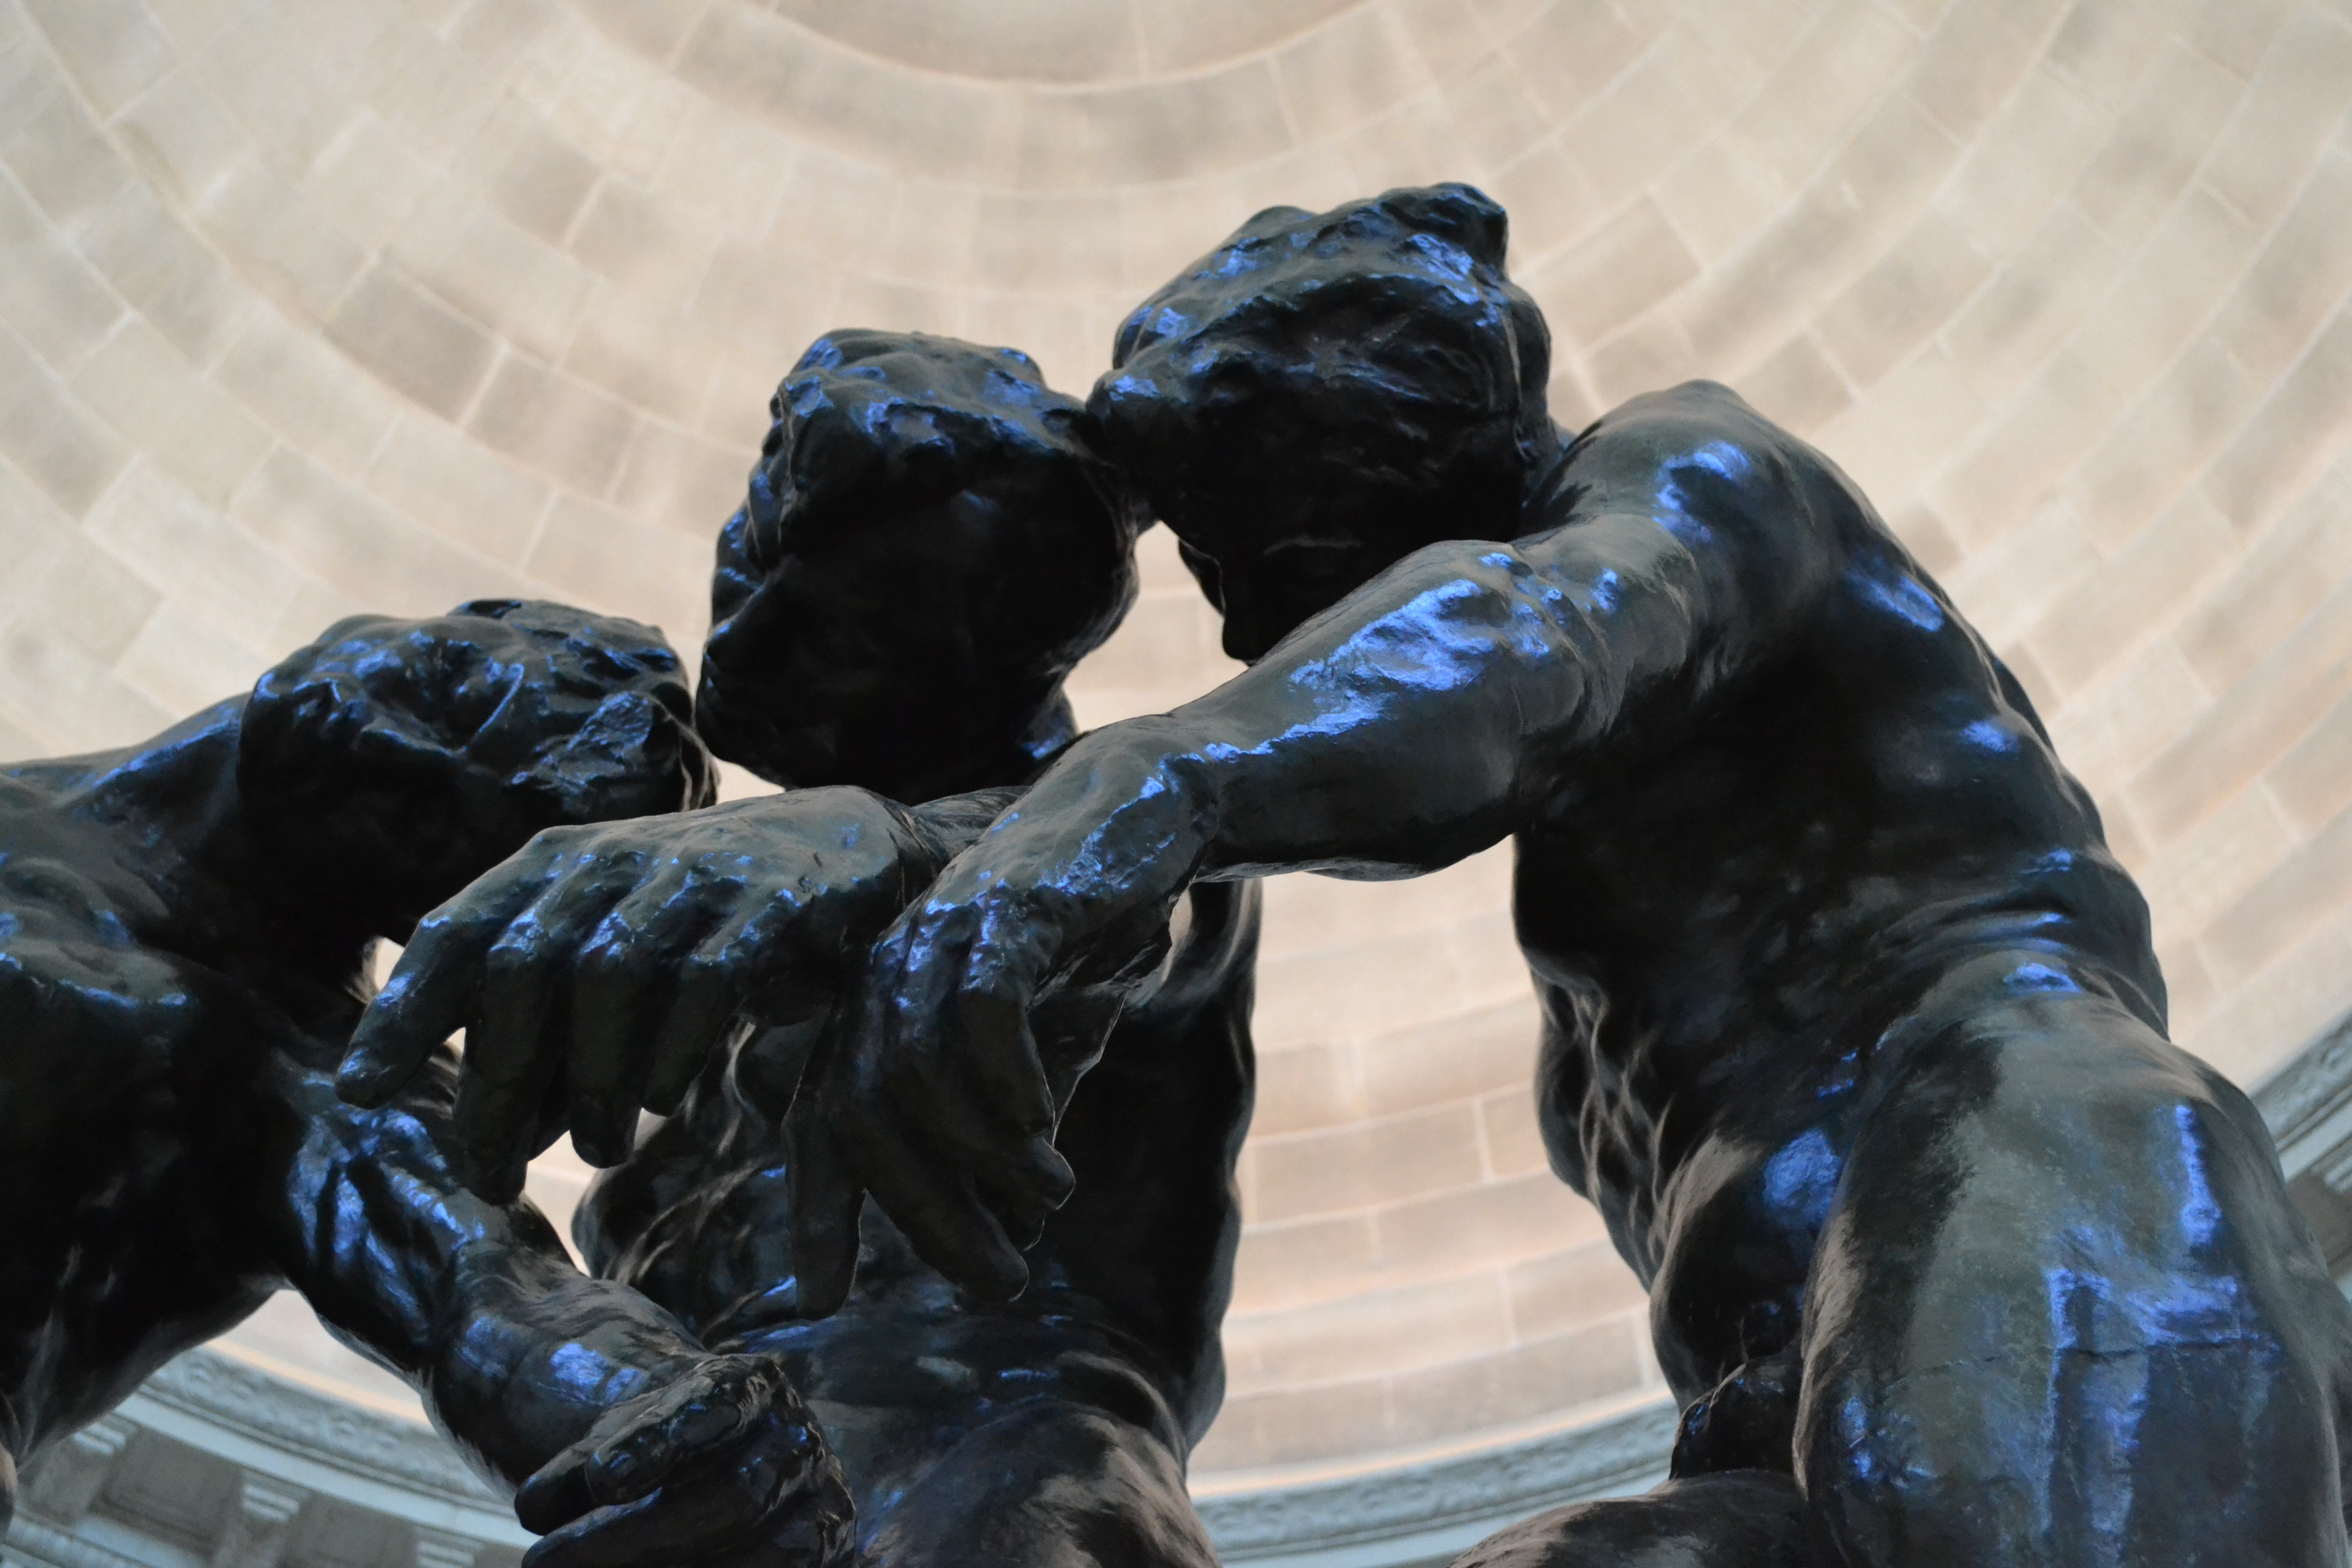 Embracing Figures, Damned Group - Auguste Rodin, ca. 1885